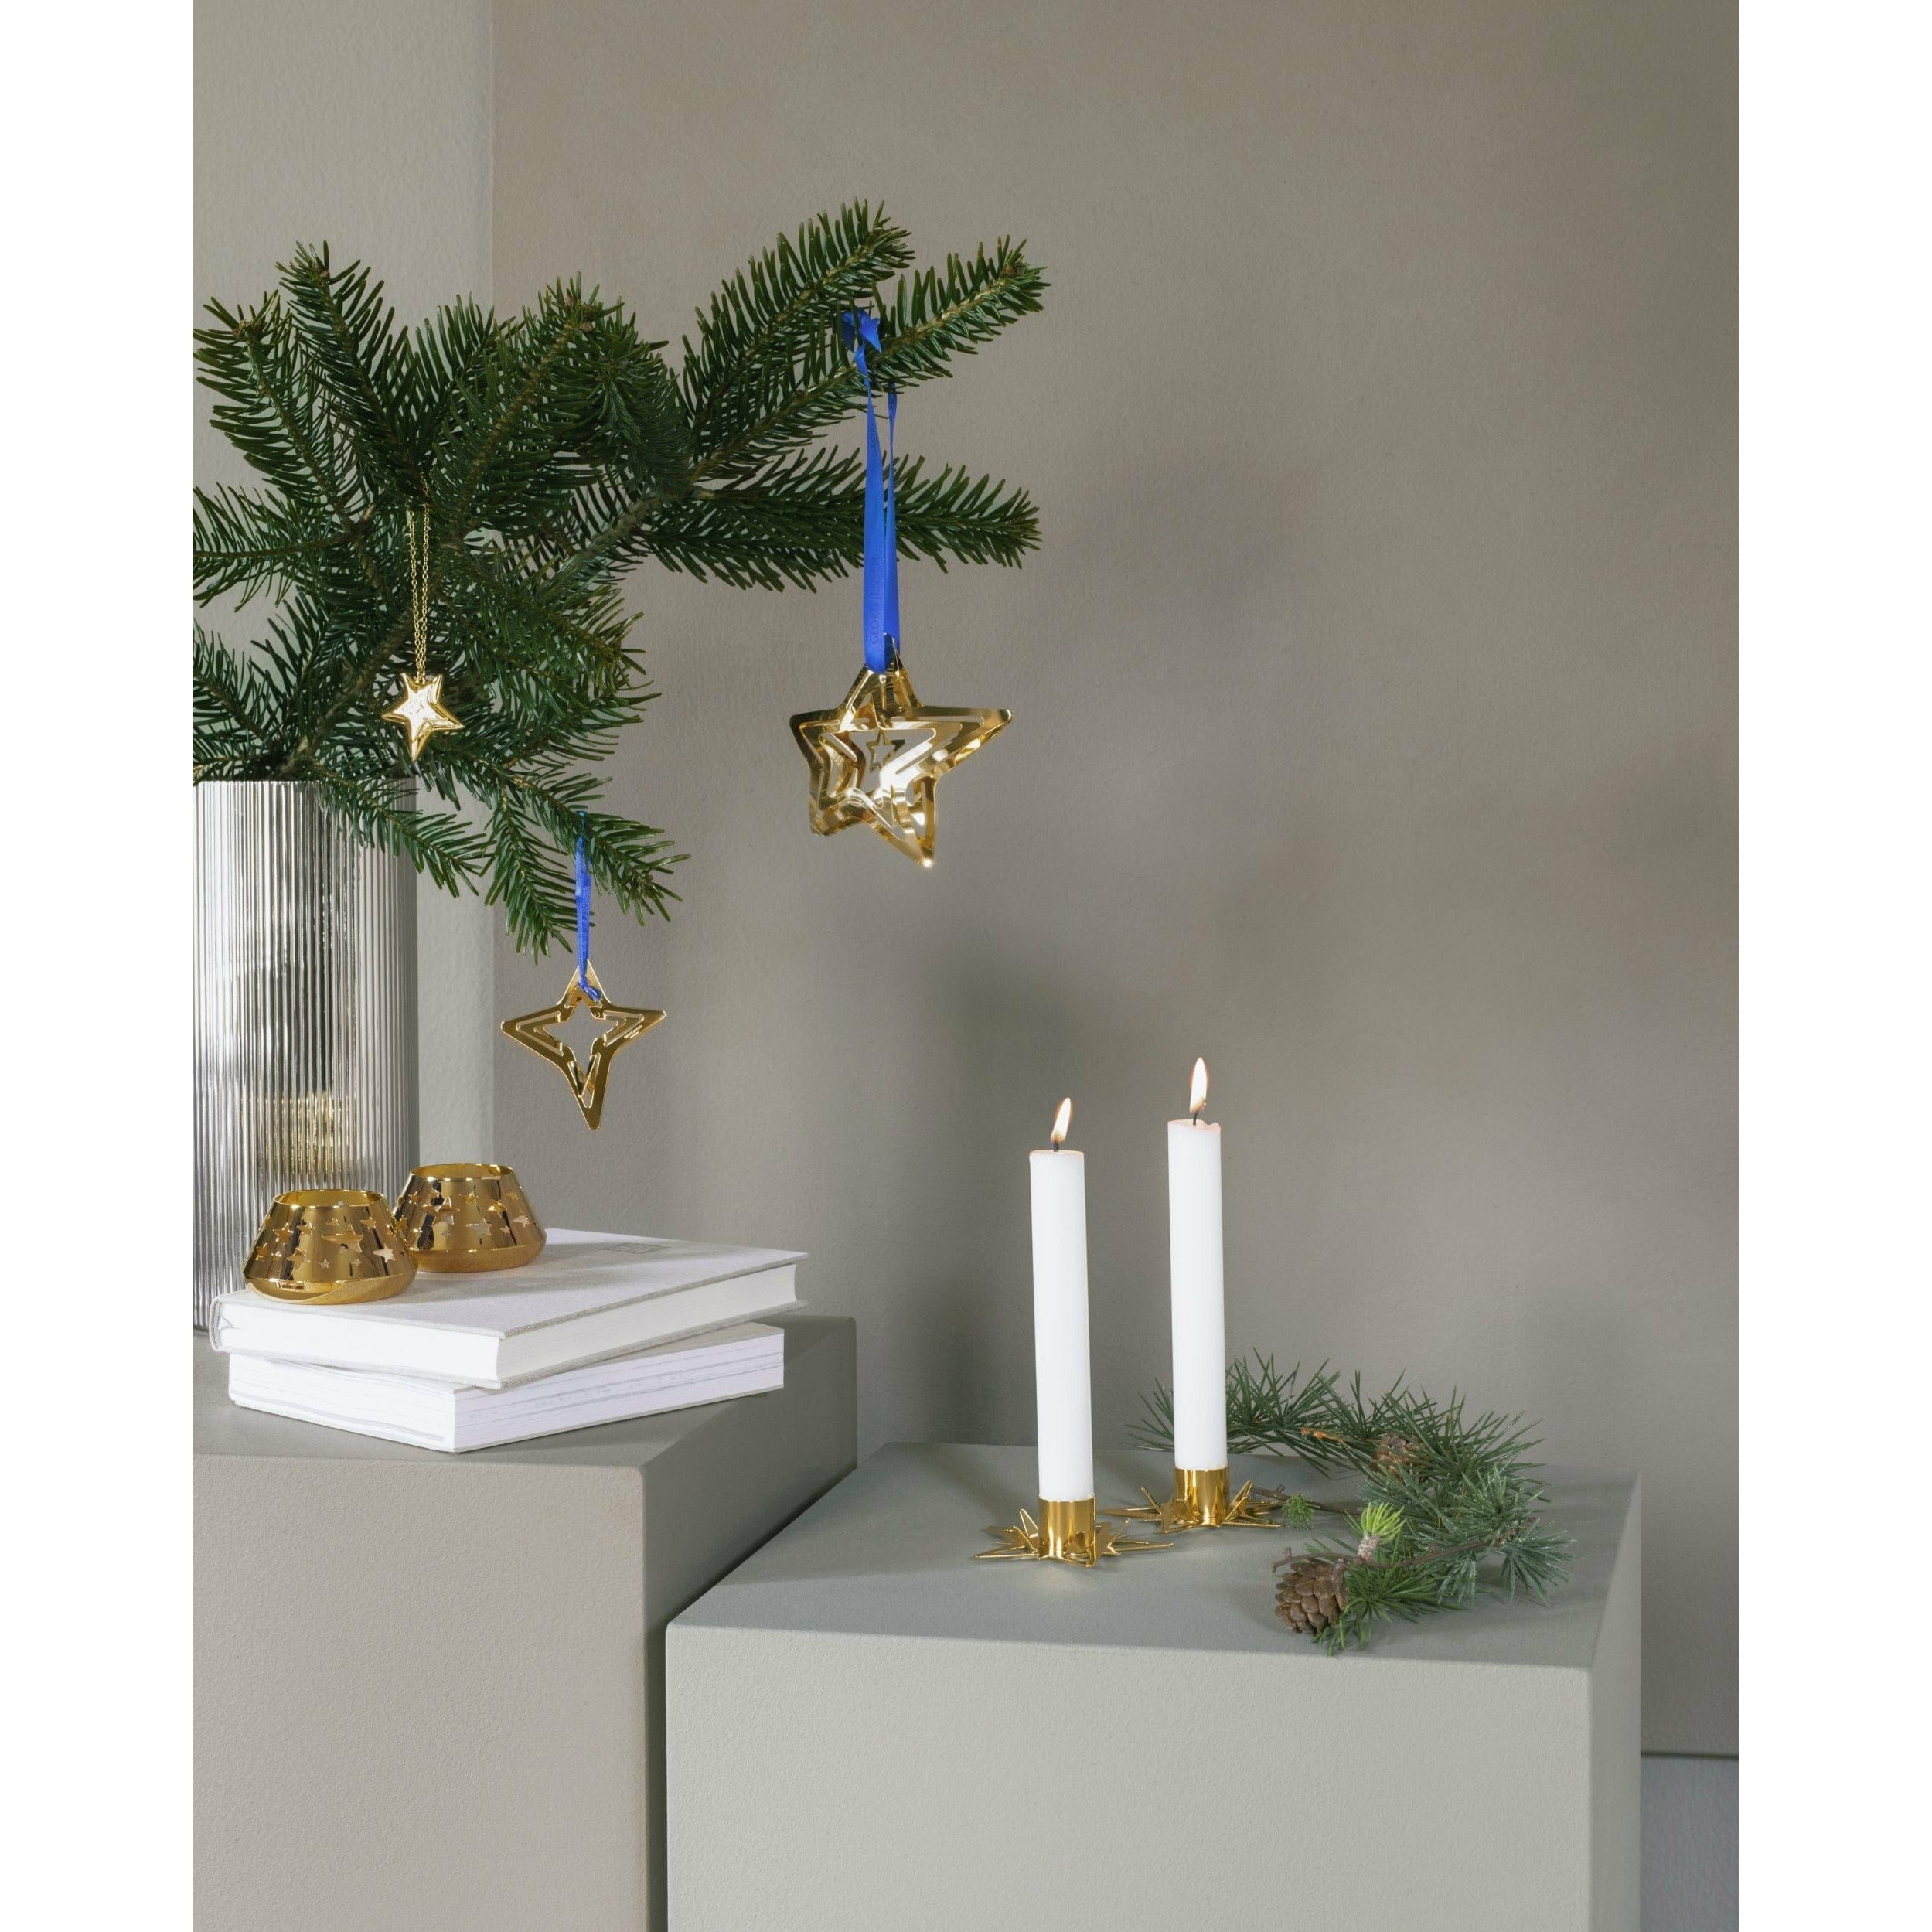 Georg Jensen Classic Christmas Star Candle Holder For Rod Candles, Set Of 2, Gold Plated